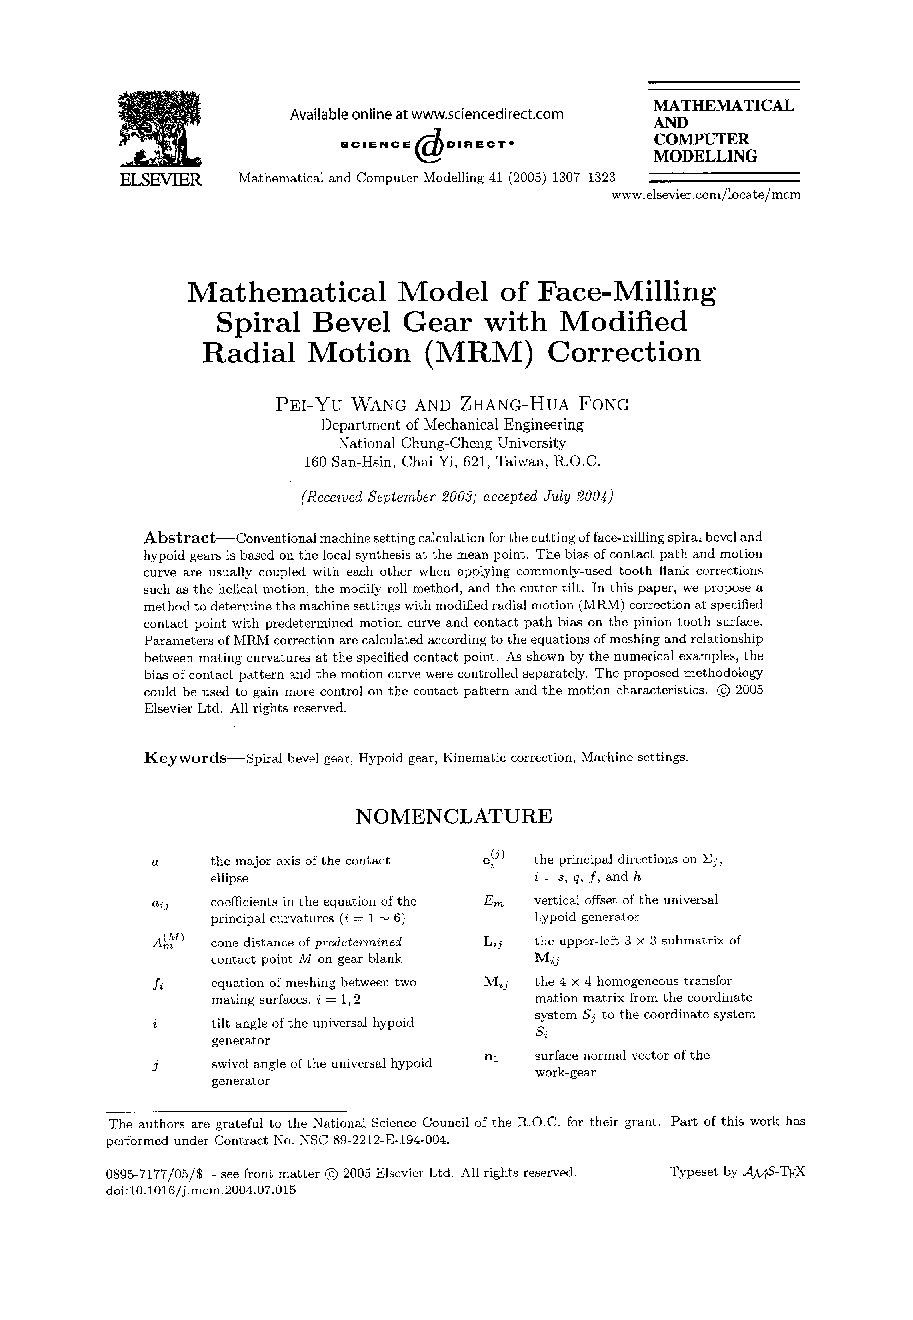 Mathematical model of face-milling spiral bevel gear with modified radial motion (MRM) correction